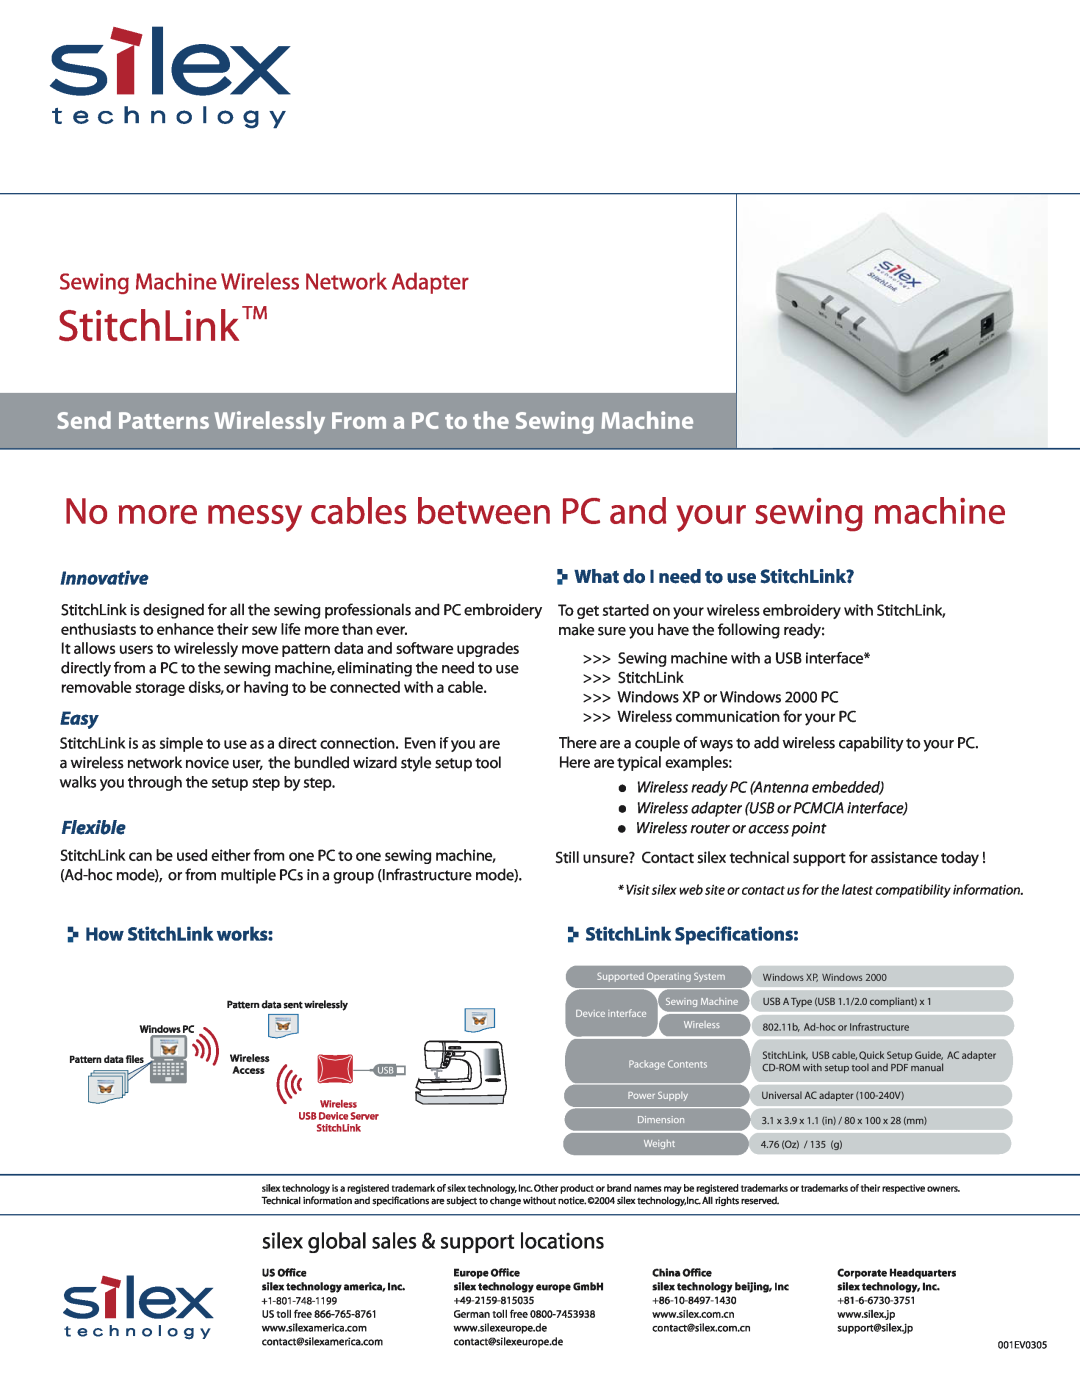 Silex technology Sewing Machine Wireless Network Adapter manual Send Patterns Wirelessly From a PC to the Sewing Machine 